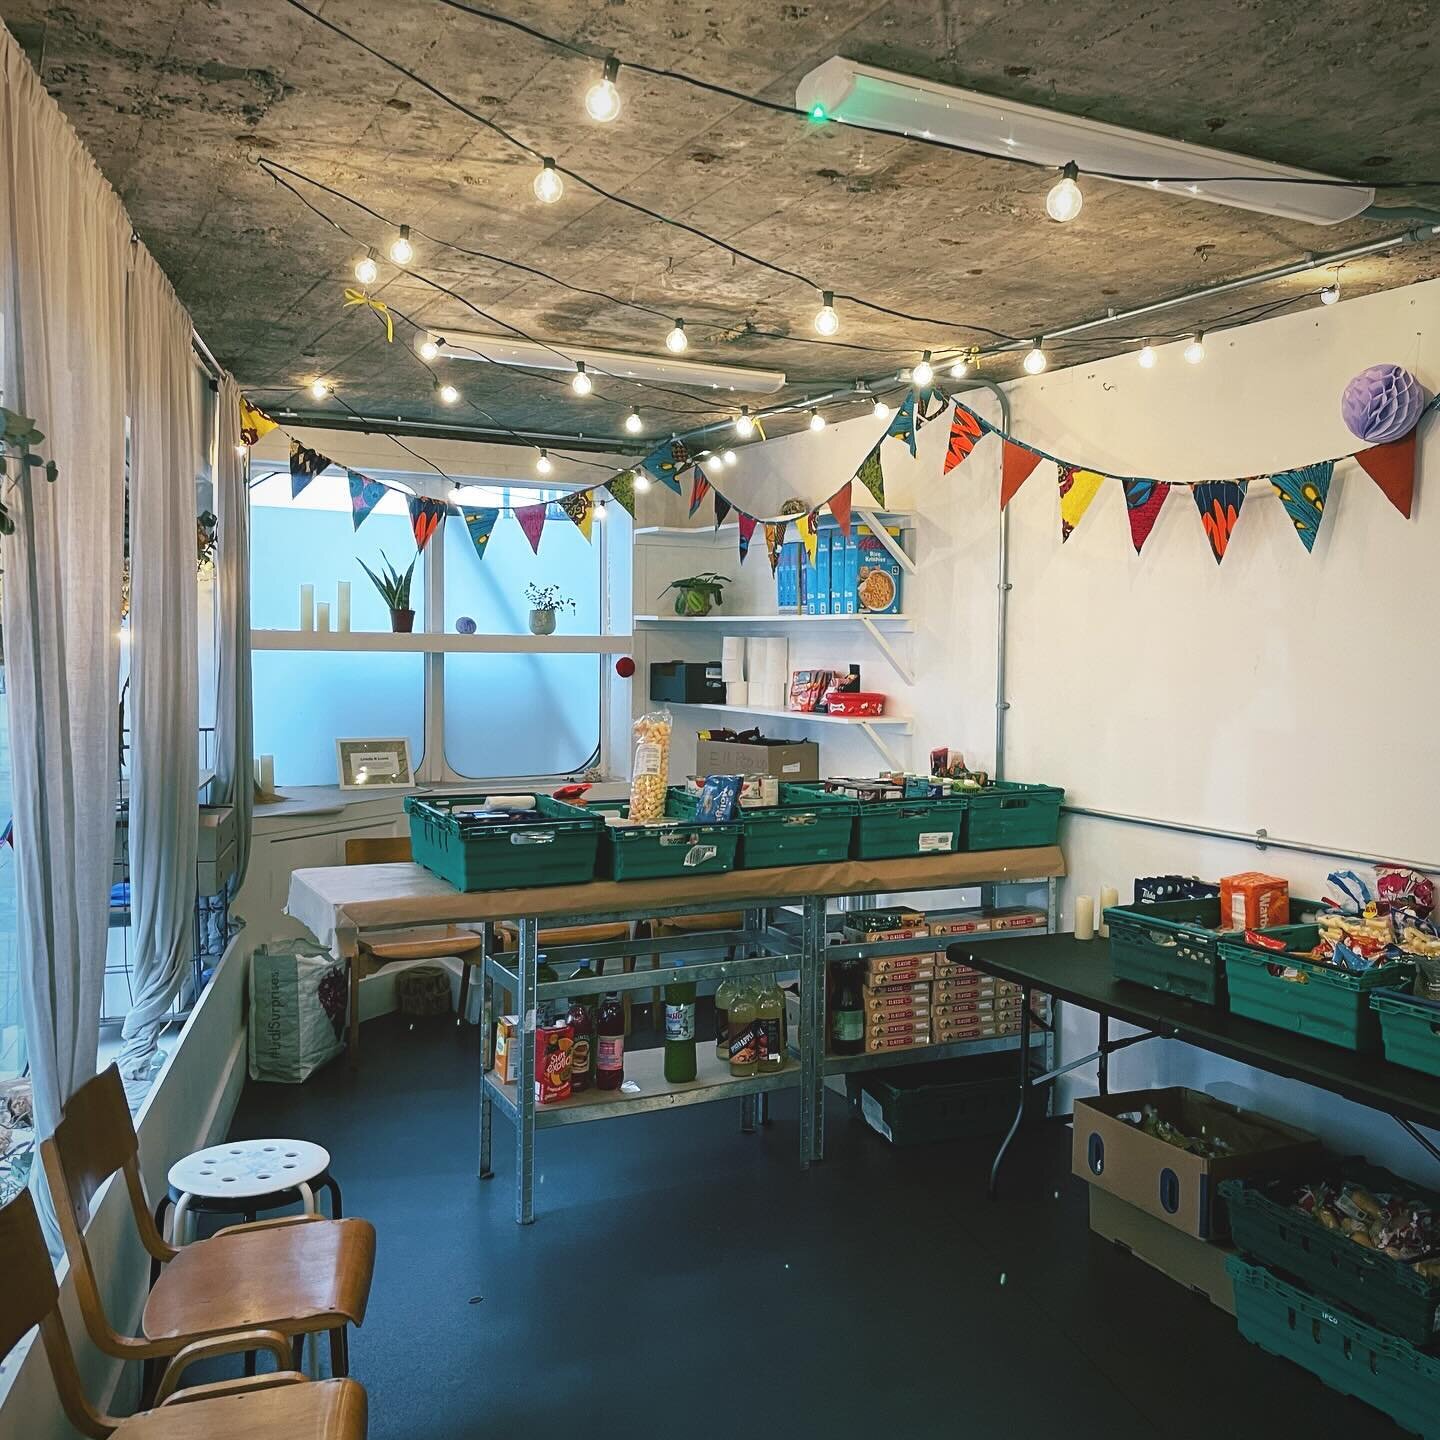 The FoodHub @ No.1 Church Lane is all set up and ready to serve!
.
24th Dec - 4th Jan 12:00-14:00 Daily.
.
Free hot drinks, snacks, pantry items and fresh fruit (whilst it lasts!).
.
If you would like to donate/support please keep an eye on our Socia